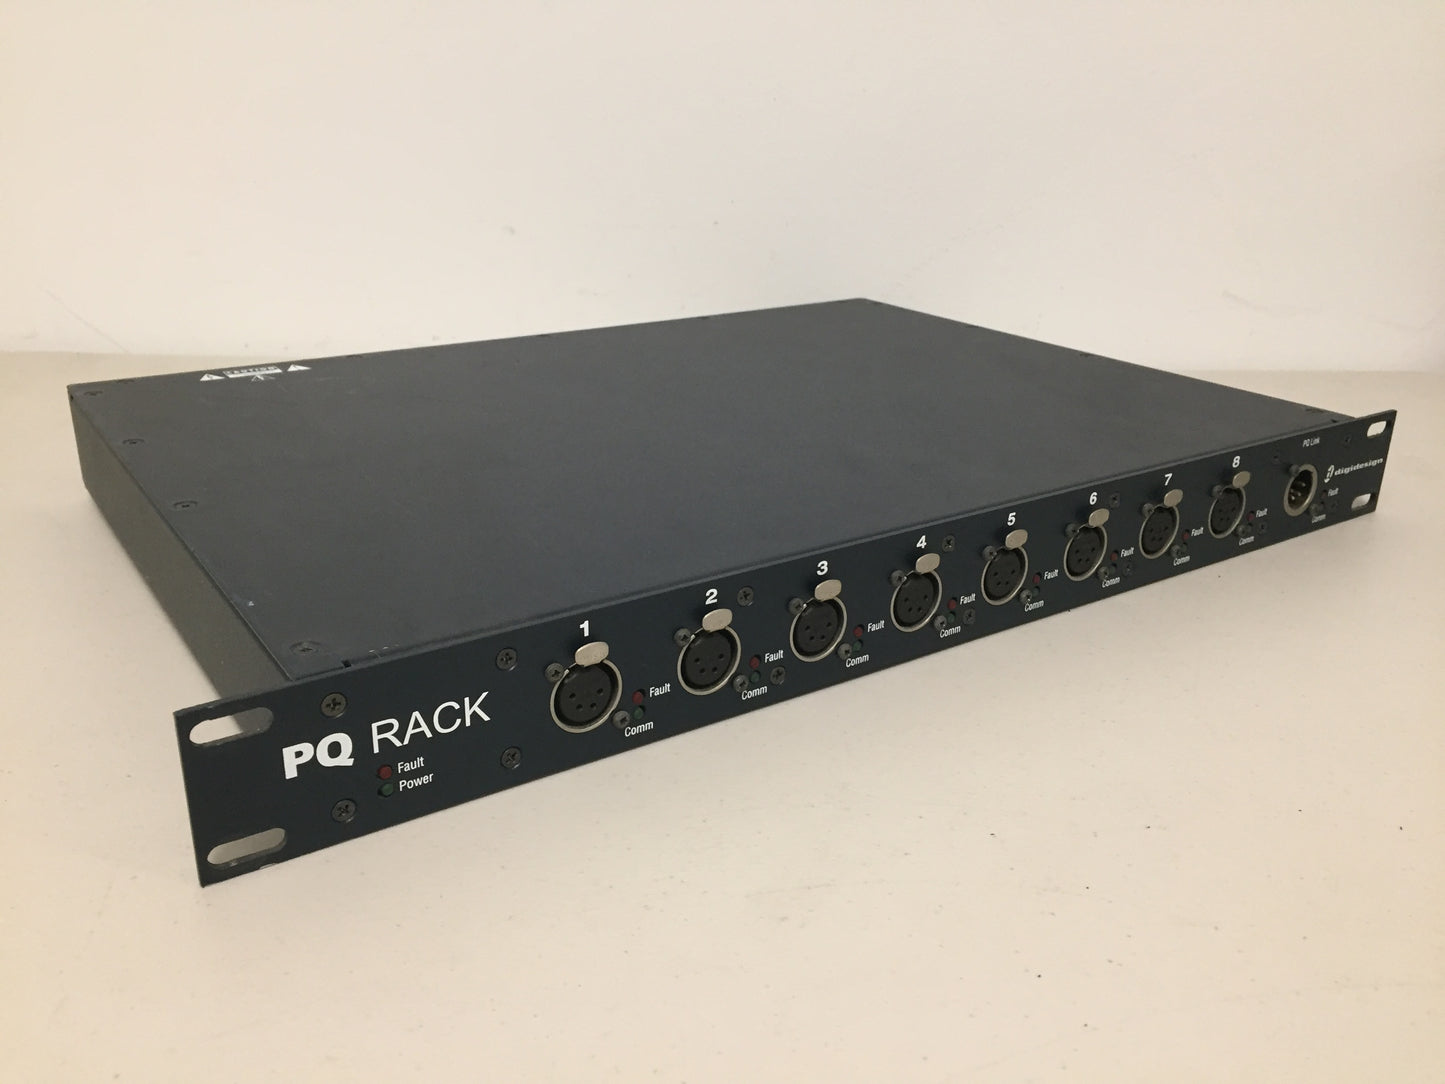 Used Digidesign Avid VENUE  PQ Racks, We Sell Professional Audio Equipment. Audio Systems, Amplifiers, Consoles, Mixers, Electronics, Entertainment, Sound, Live. 